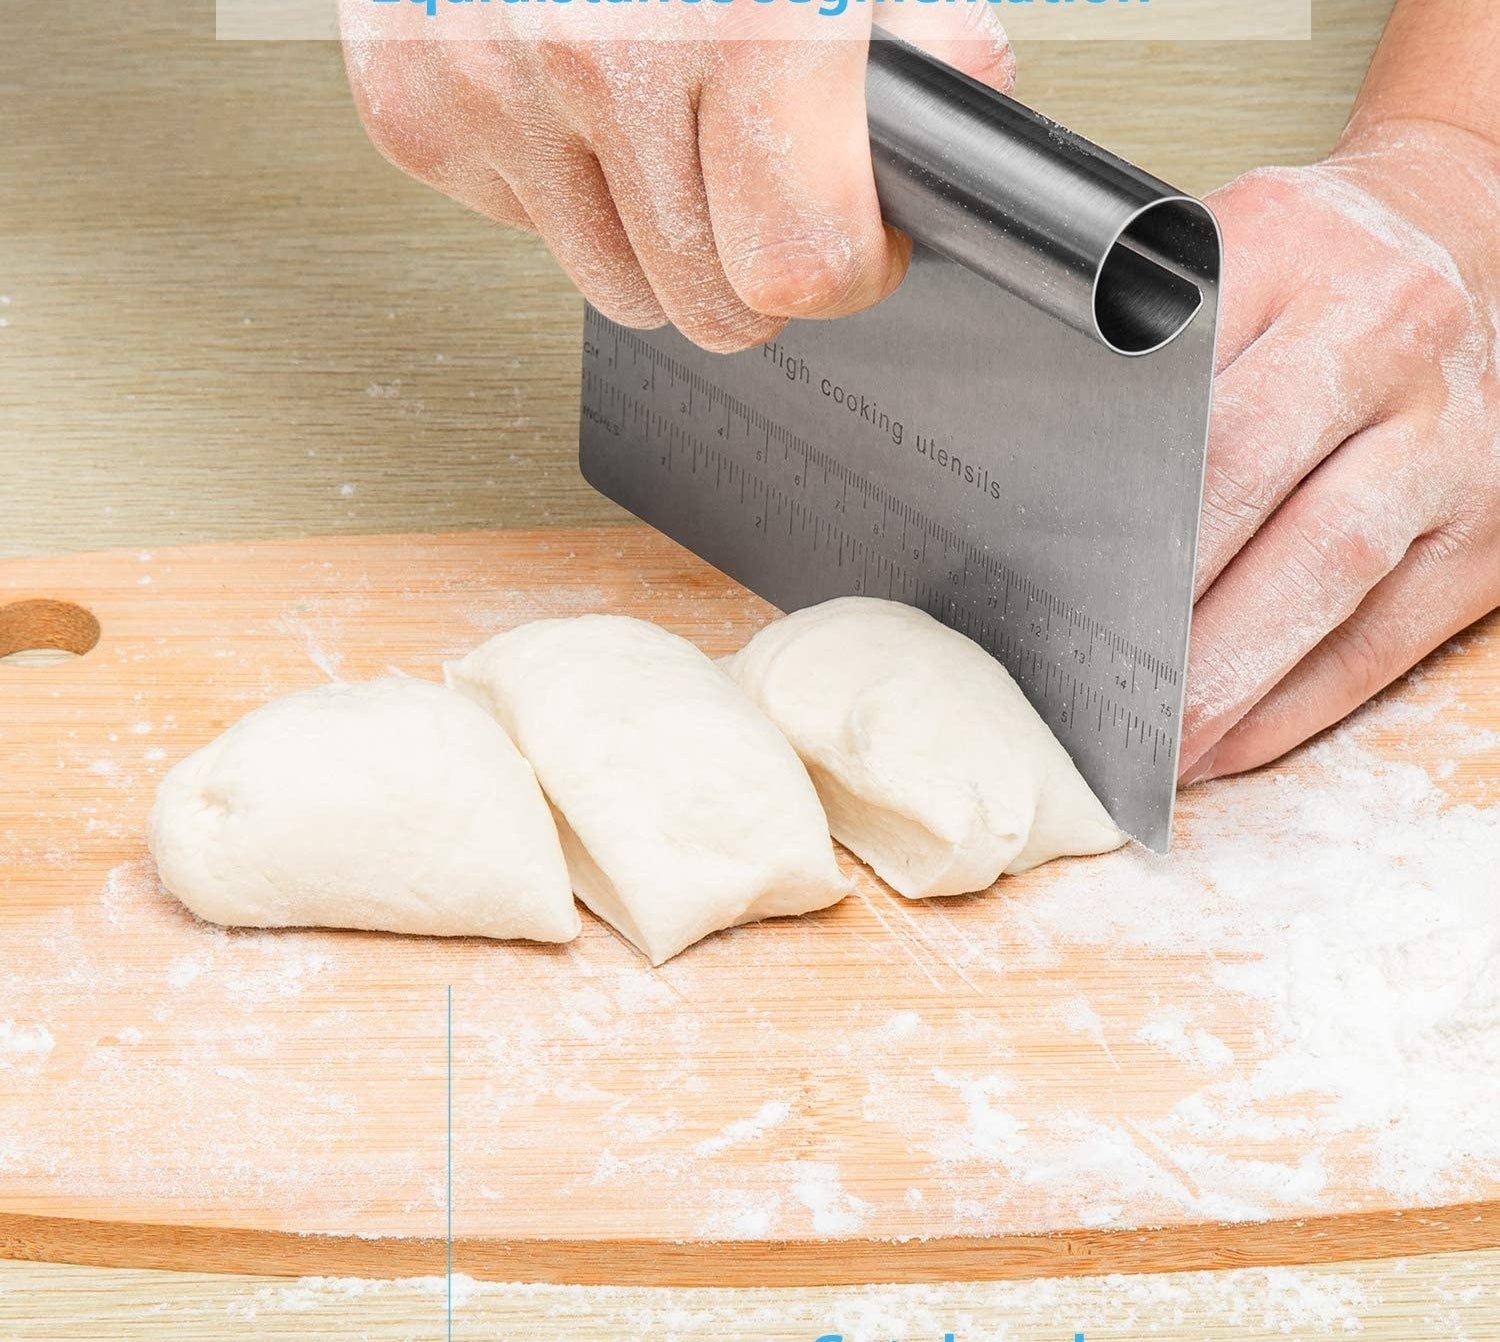 36 Baking Tools Essential For Any Kitchen